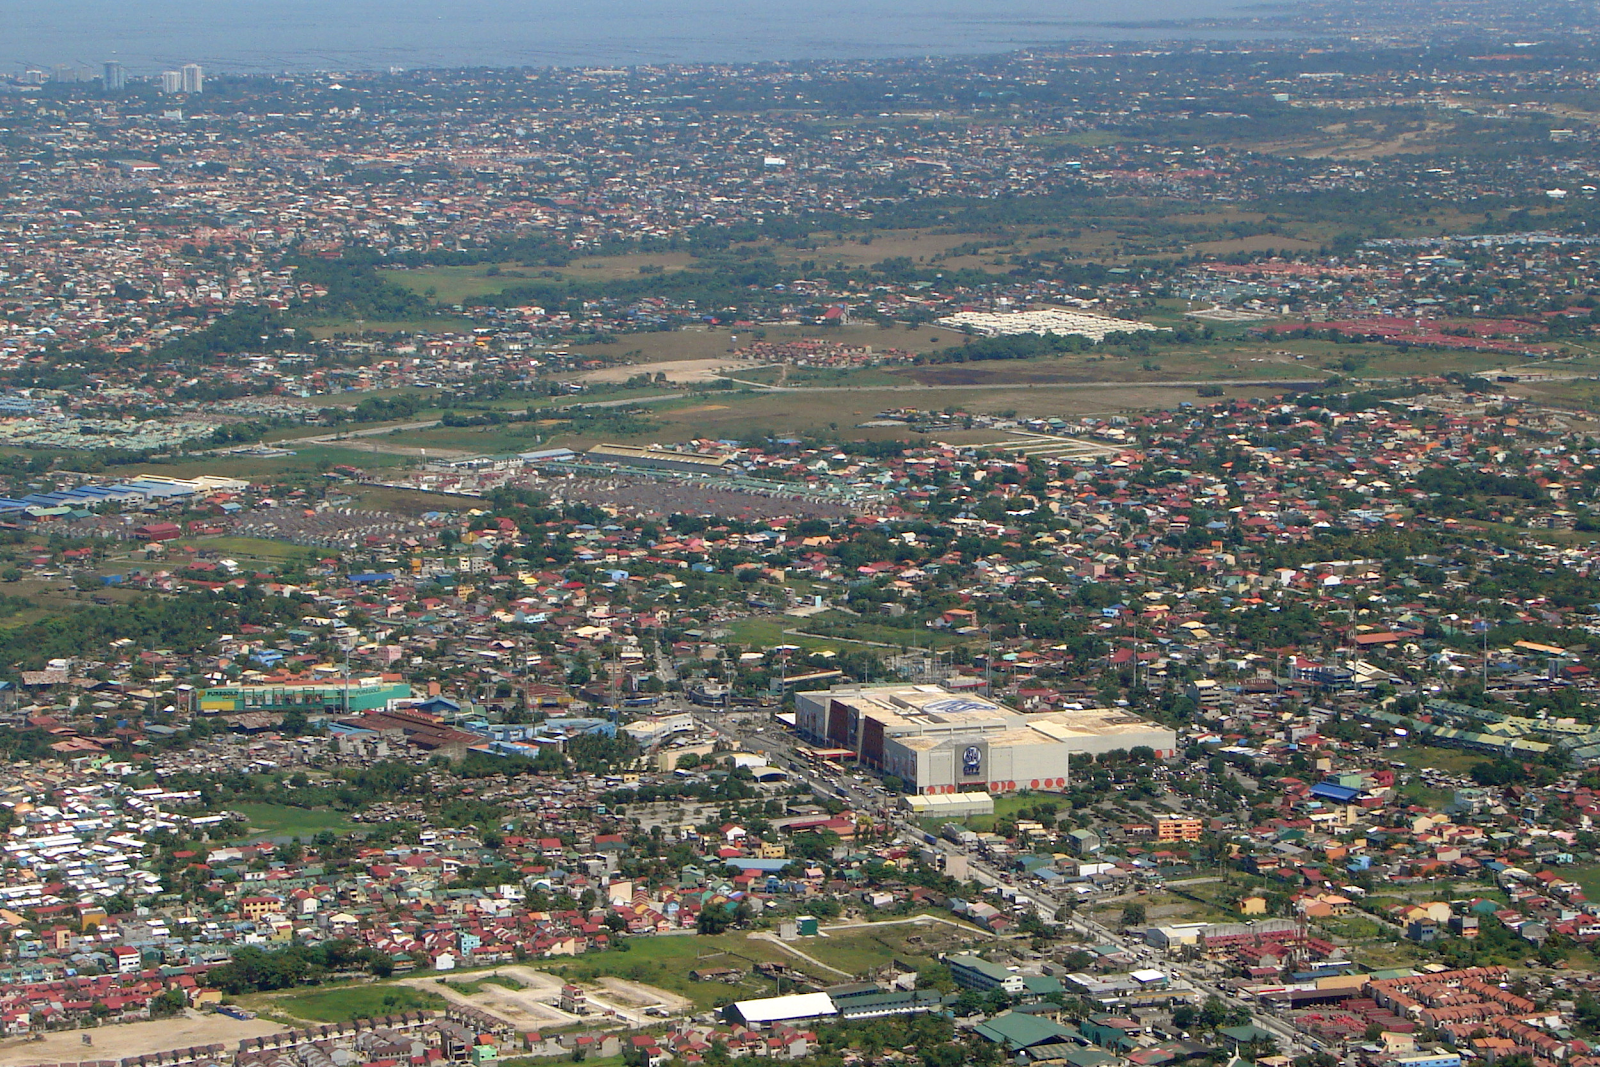 A vast piece of land filled with various Real Estate Projects in Cavite